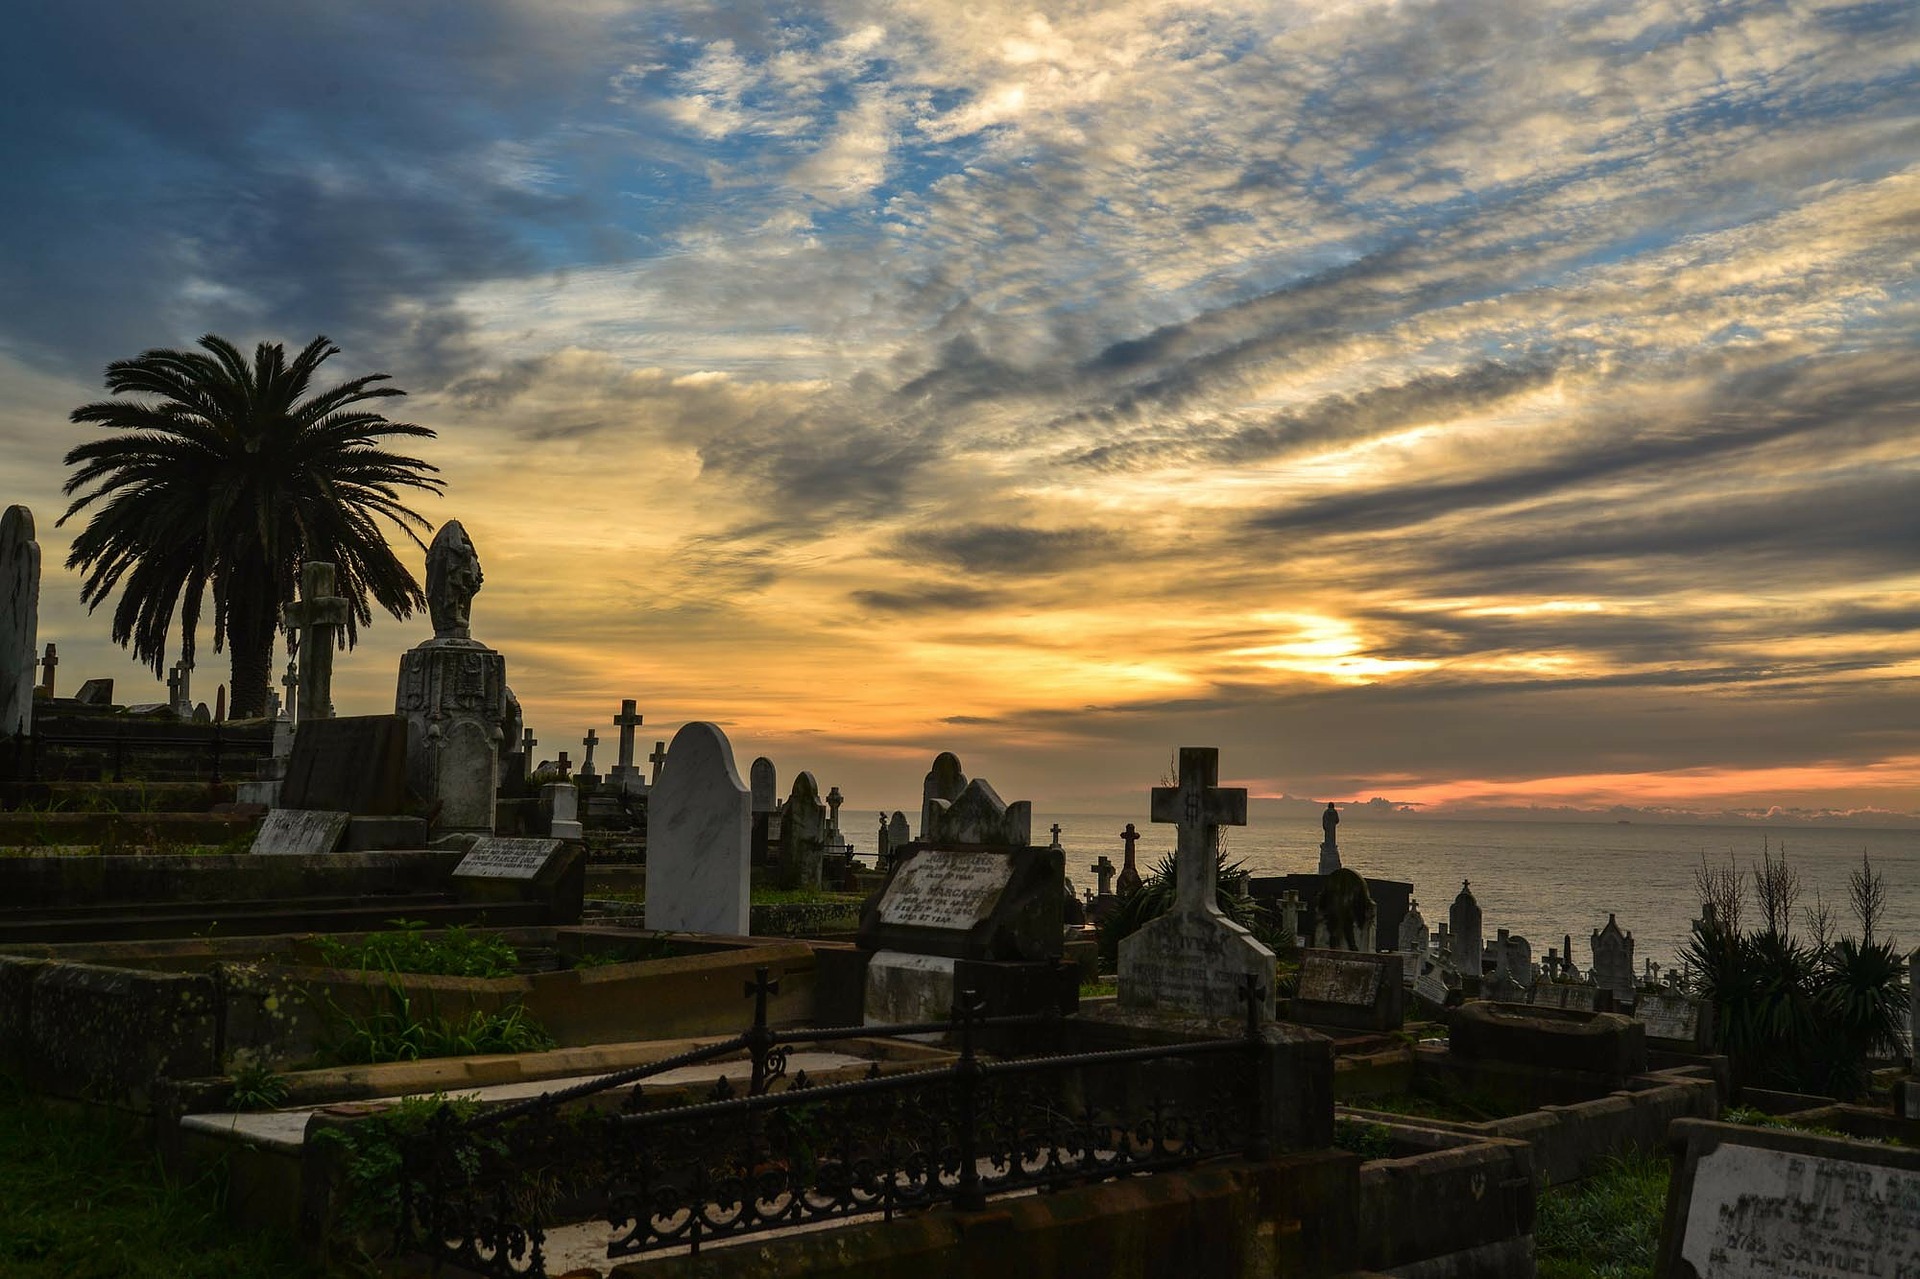 A graveyard with many various headstones stretches out in the foreground, beneath a hazy sunlit sky beside the sea.